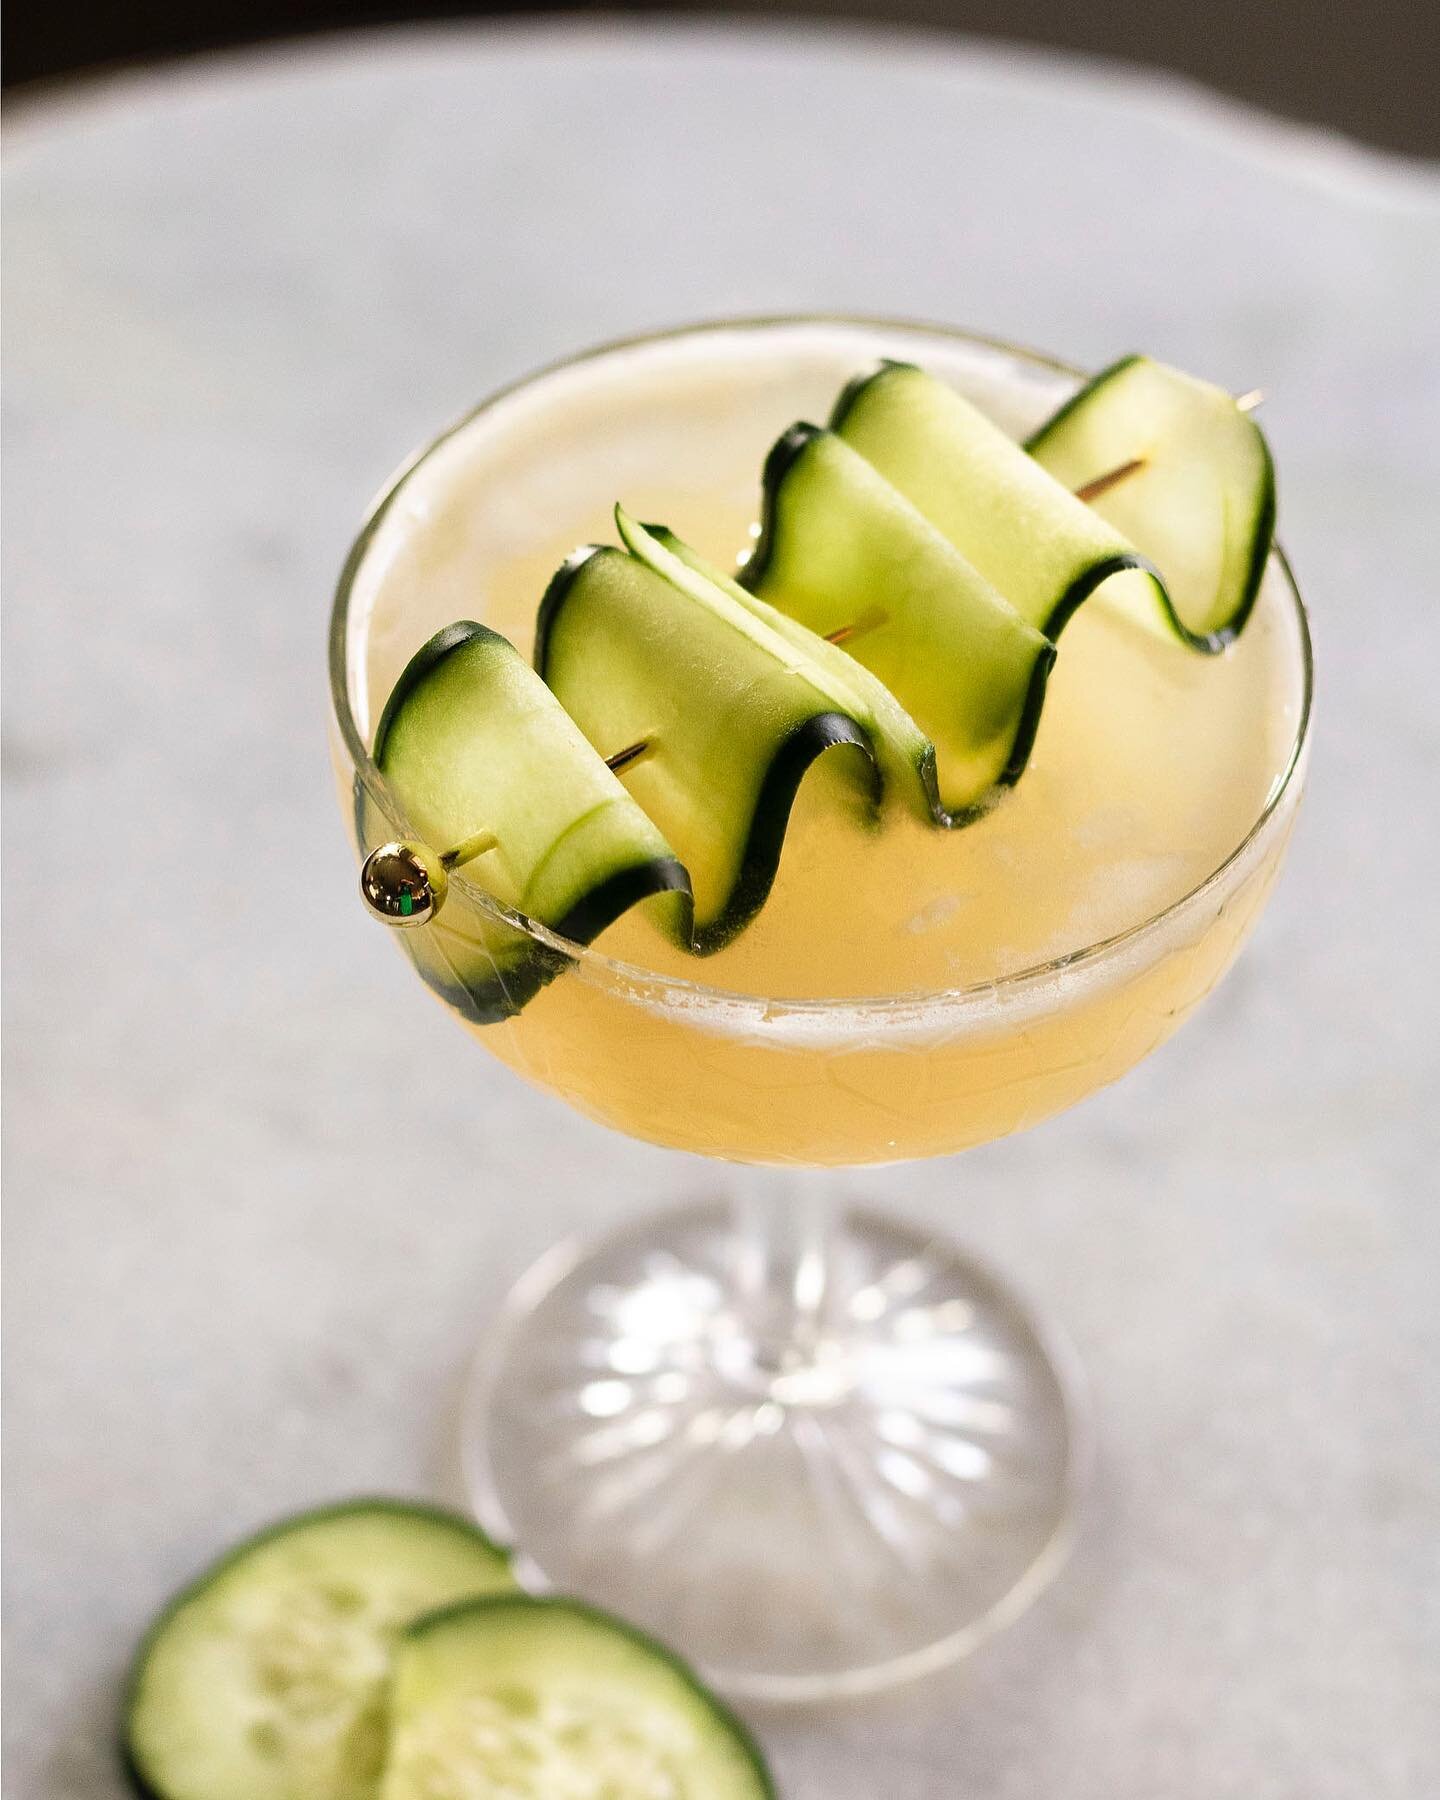 🥒 DAY 4 of 5 DAYS OF TEQUILA COCKTAILS⁣
⁣
The El Pepino Margarita - Spanish for &ldquo;little cucumber&rdquo; is a new twist on the classic cucumber margarita. ⁣
⁣
EL PEPINO RECIPE⁣
*  4 Cucumber Slices⁣
* 2 large Basil Leaves⁣
* 3/4 oz Agave Nectar